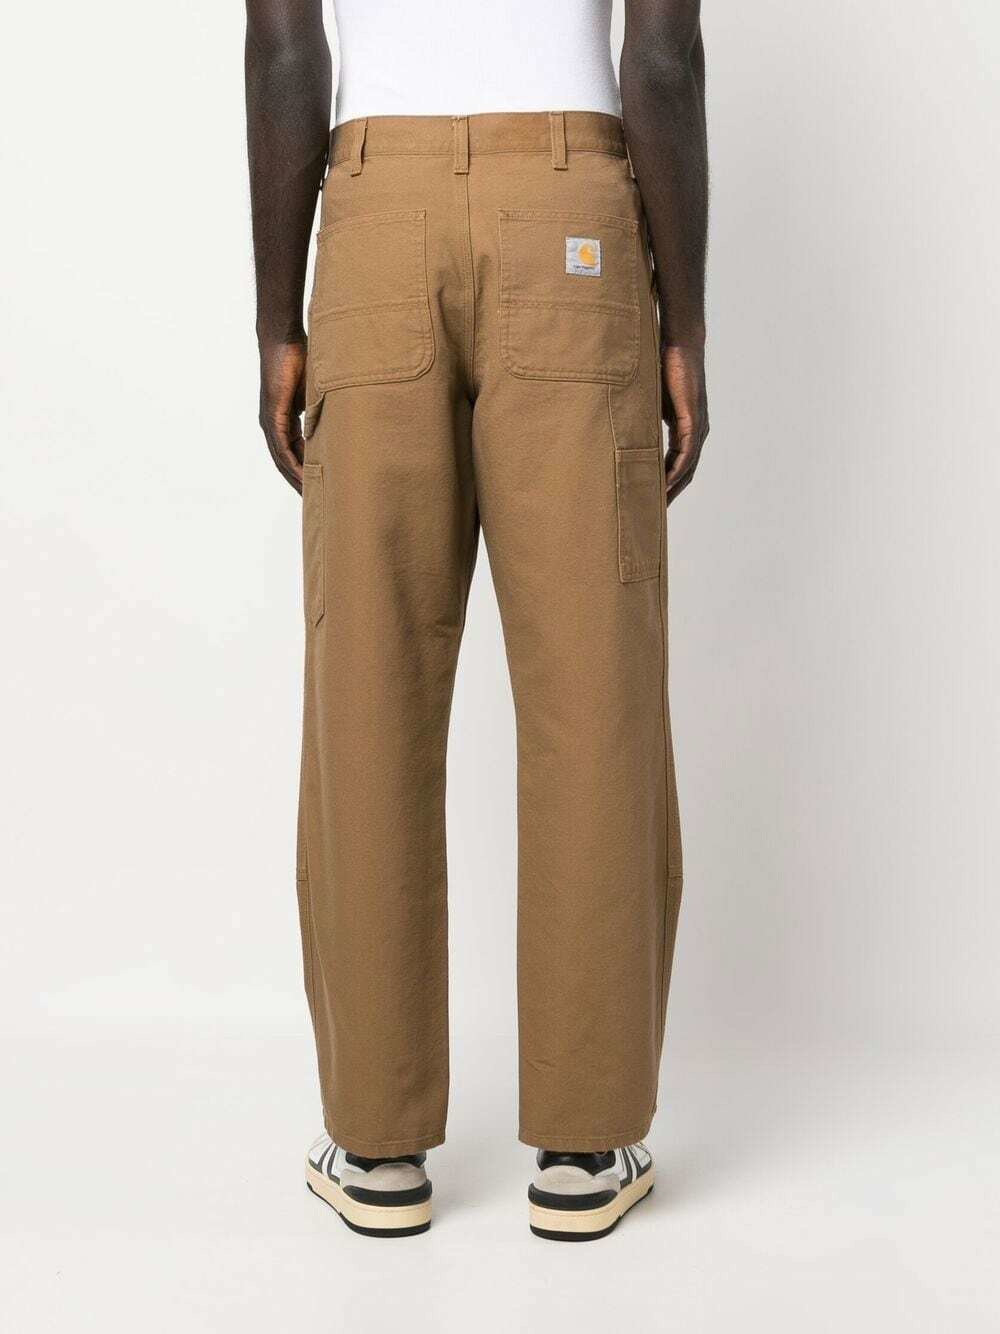 Carhartt WIP cotton trousers Aviation green color | buy on PRM